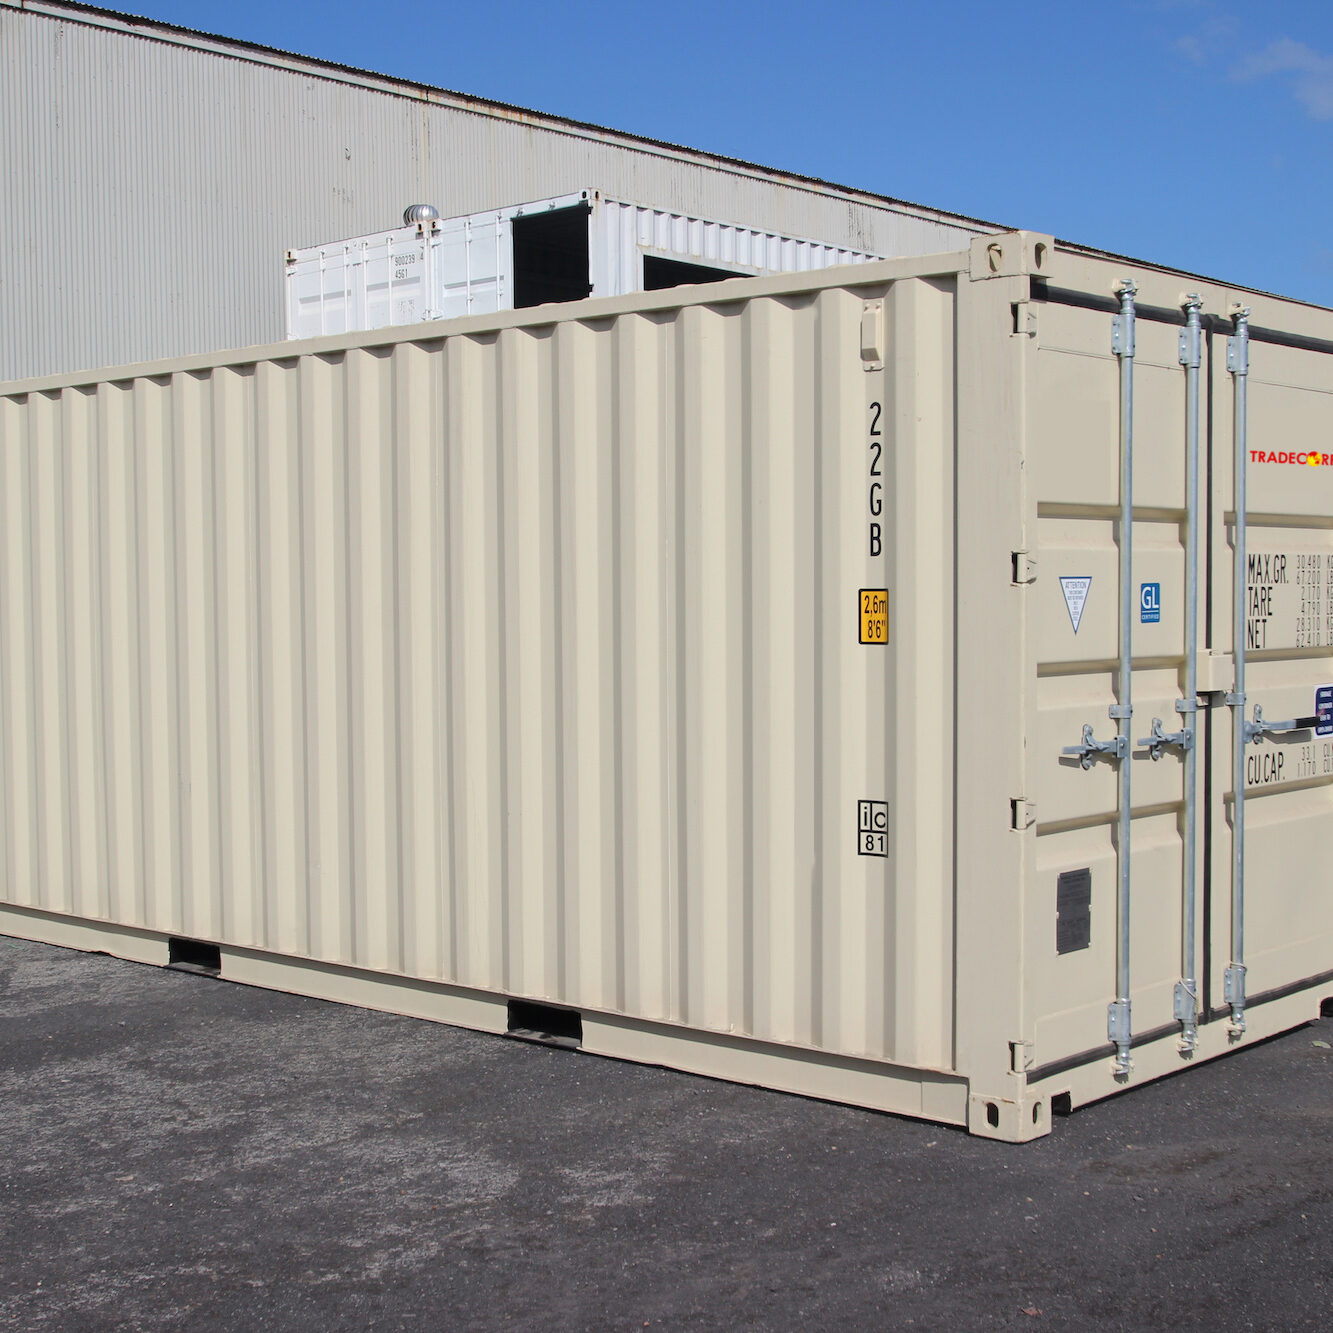 Standard Shipping Container hire tradecorp international